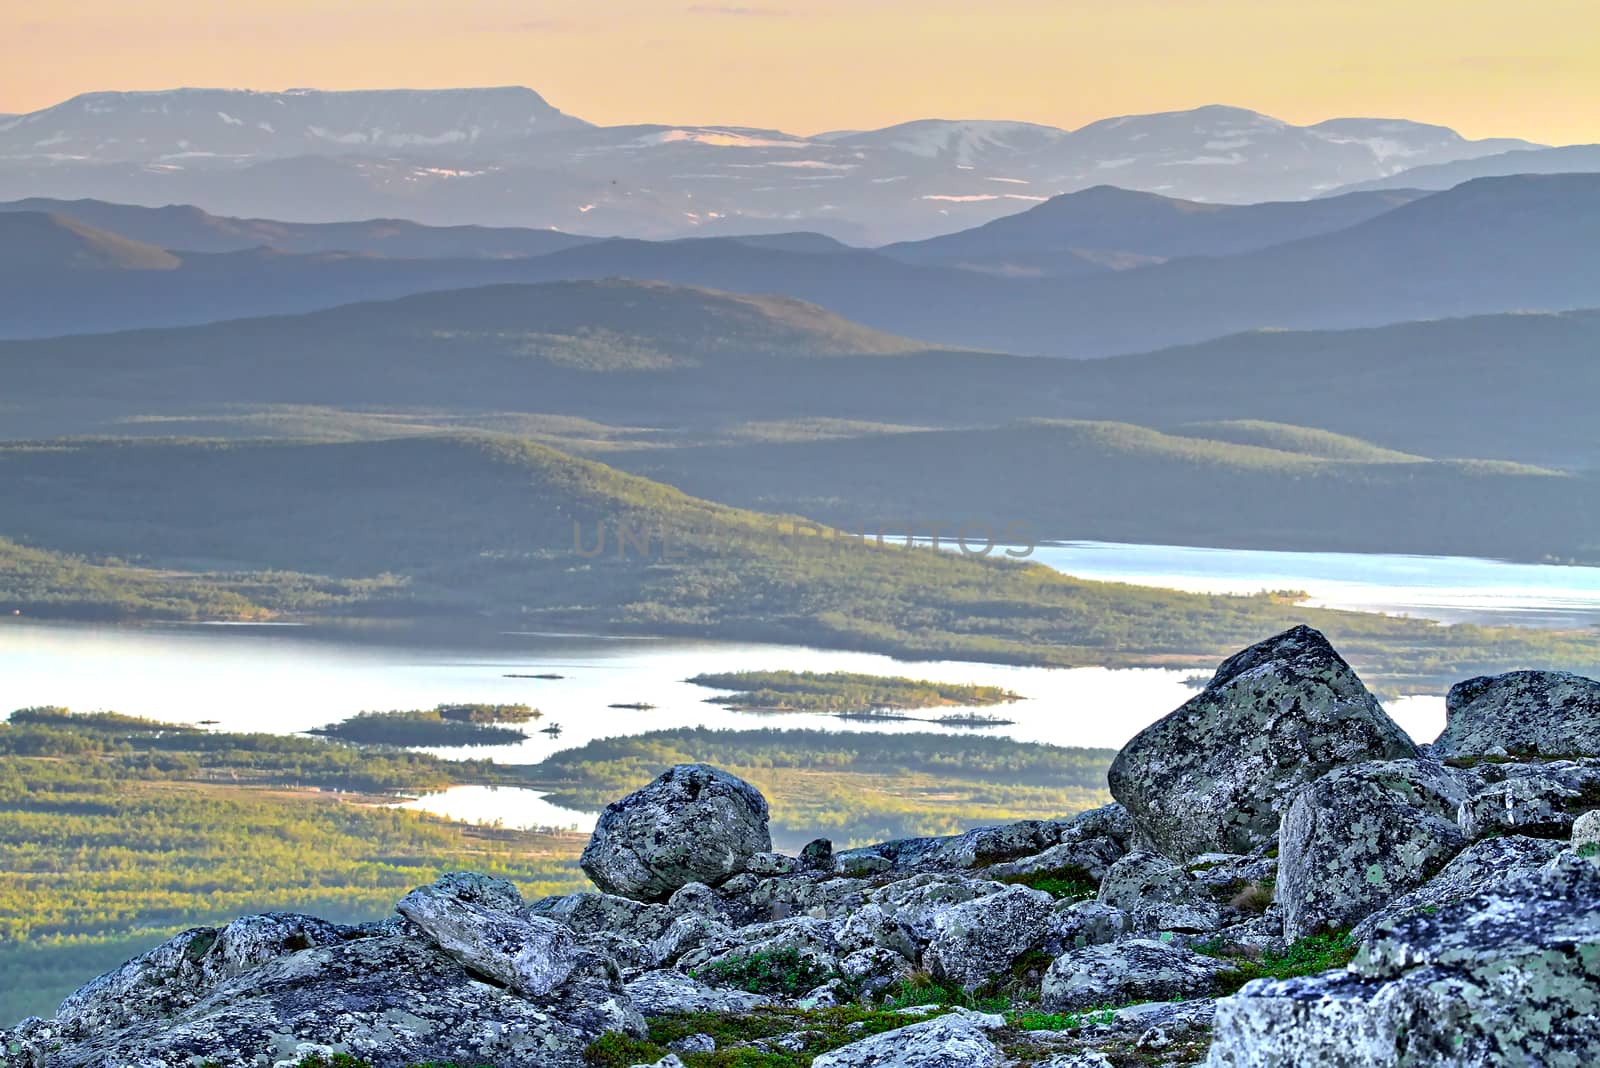 A stunning landscape view from the top of the mountain in Finnish Lapland.